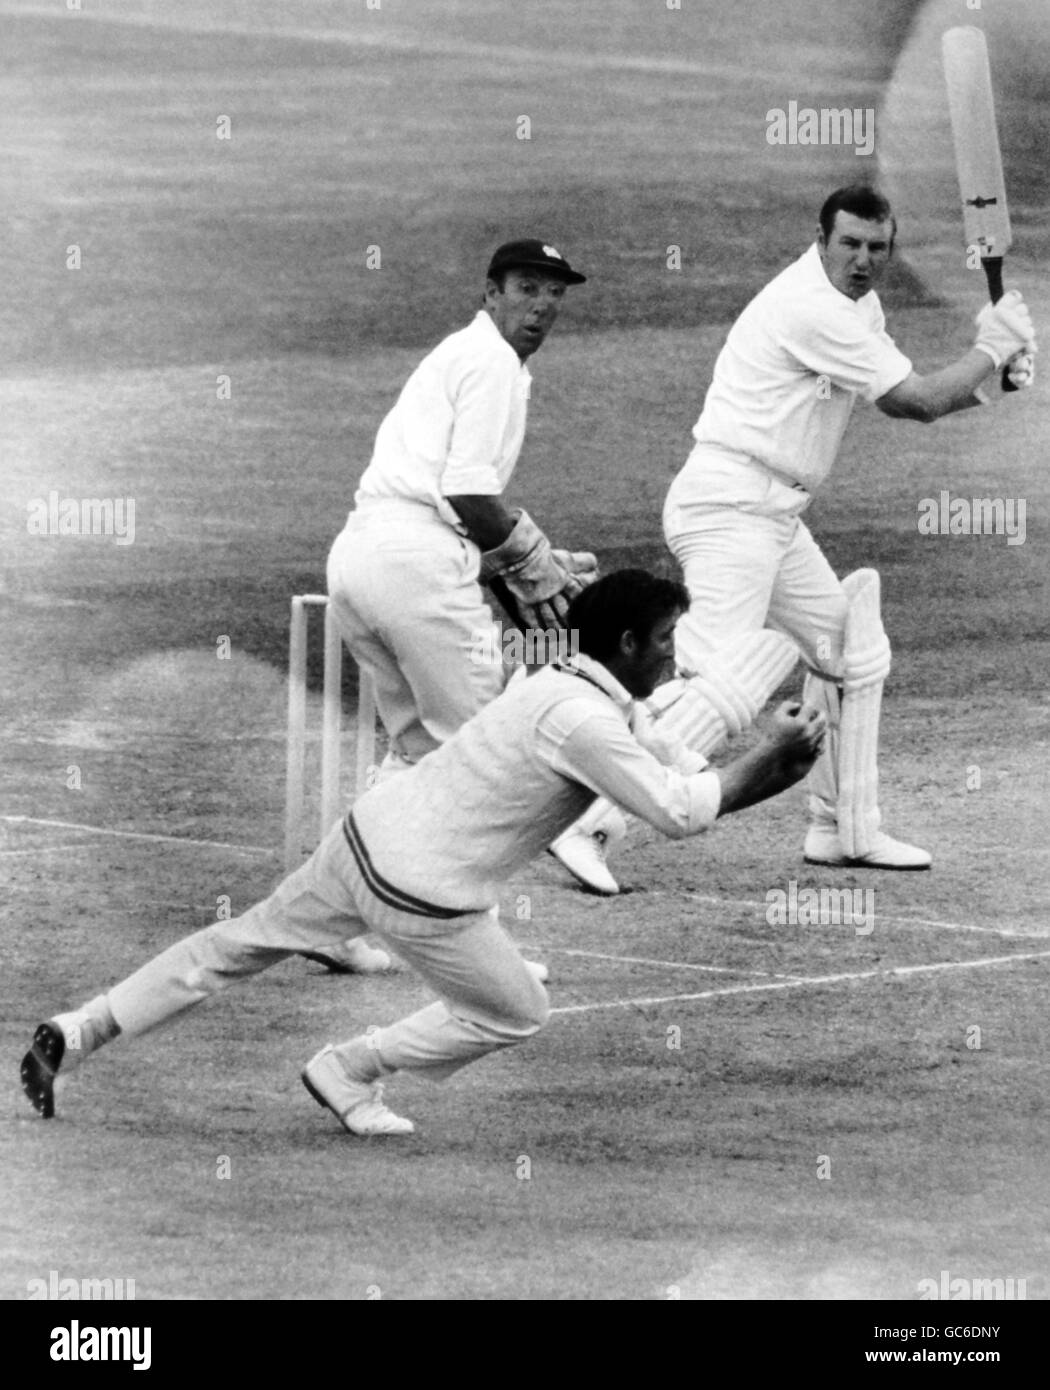 Cricket - Middlesex v Sussex Day Two - County Championship 1970 -Venue Lord's Cricket Ground.. J.M.Parker is brilliantly caught at slips by Peter Parfitt off the bowling of Latchman for 40. Stock Photo